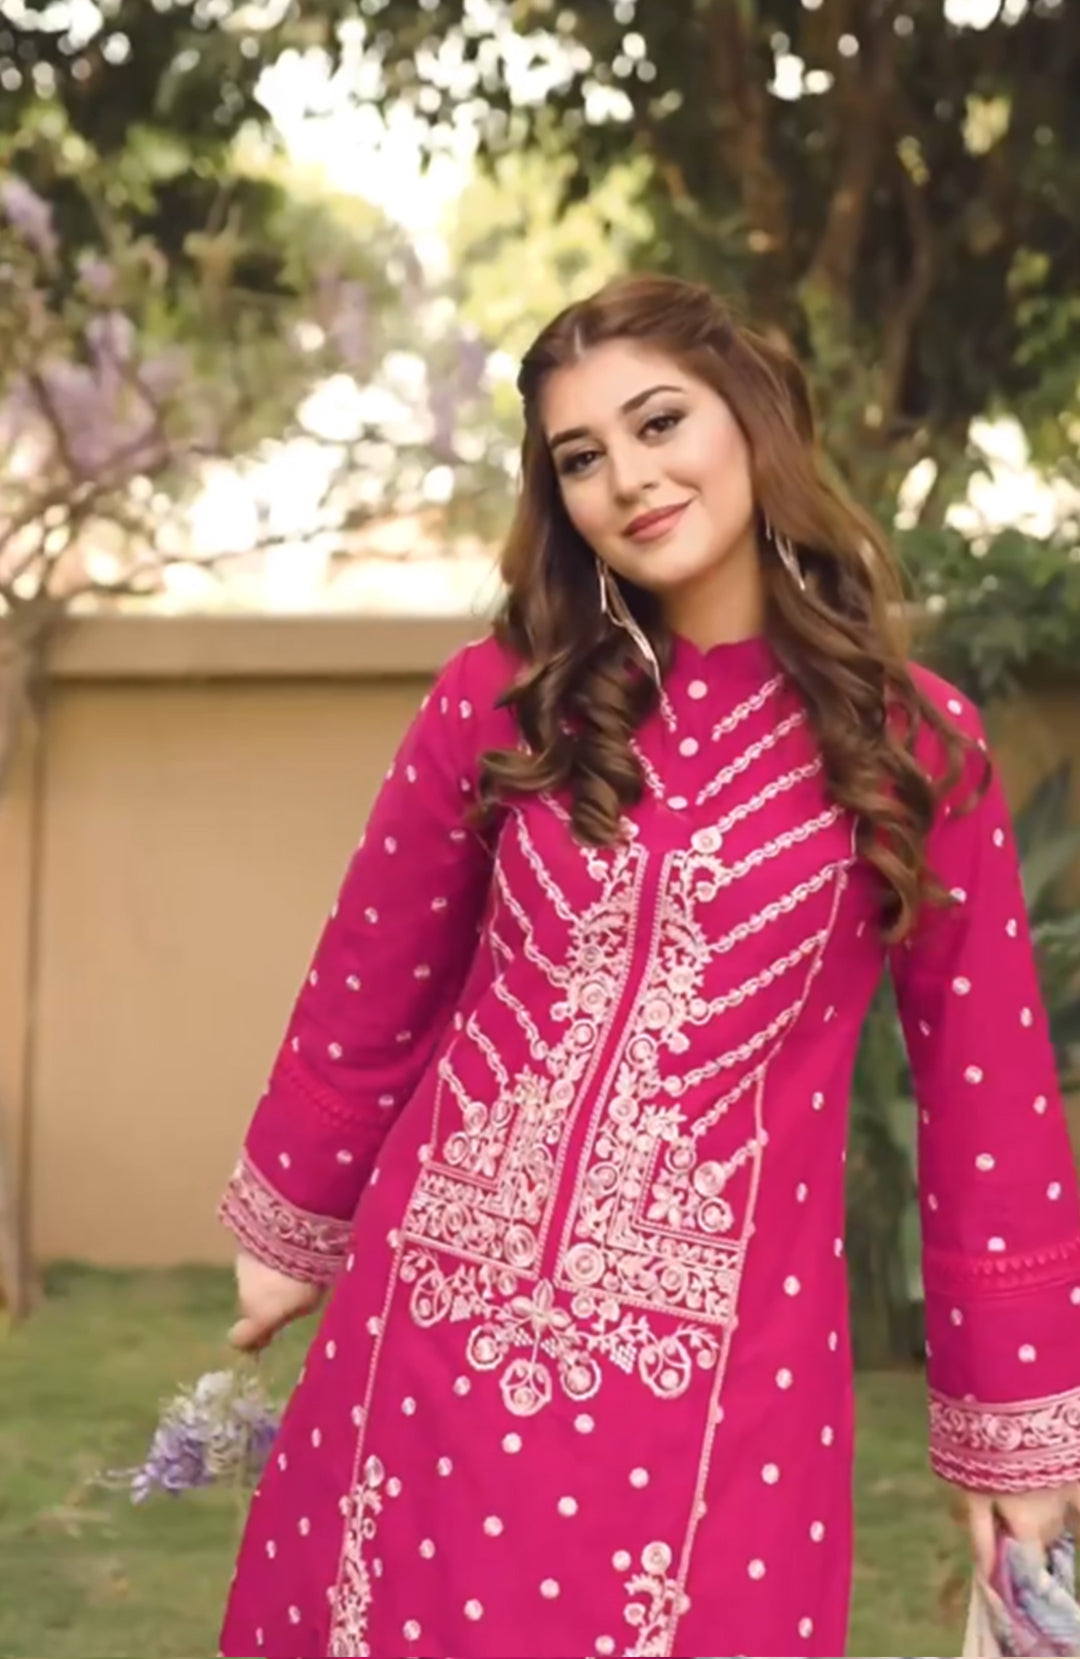 Verdurous | 3-Pc Stitched Lawn Embroidered Suit